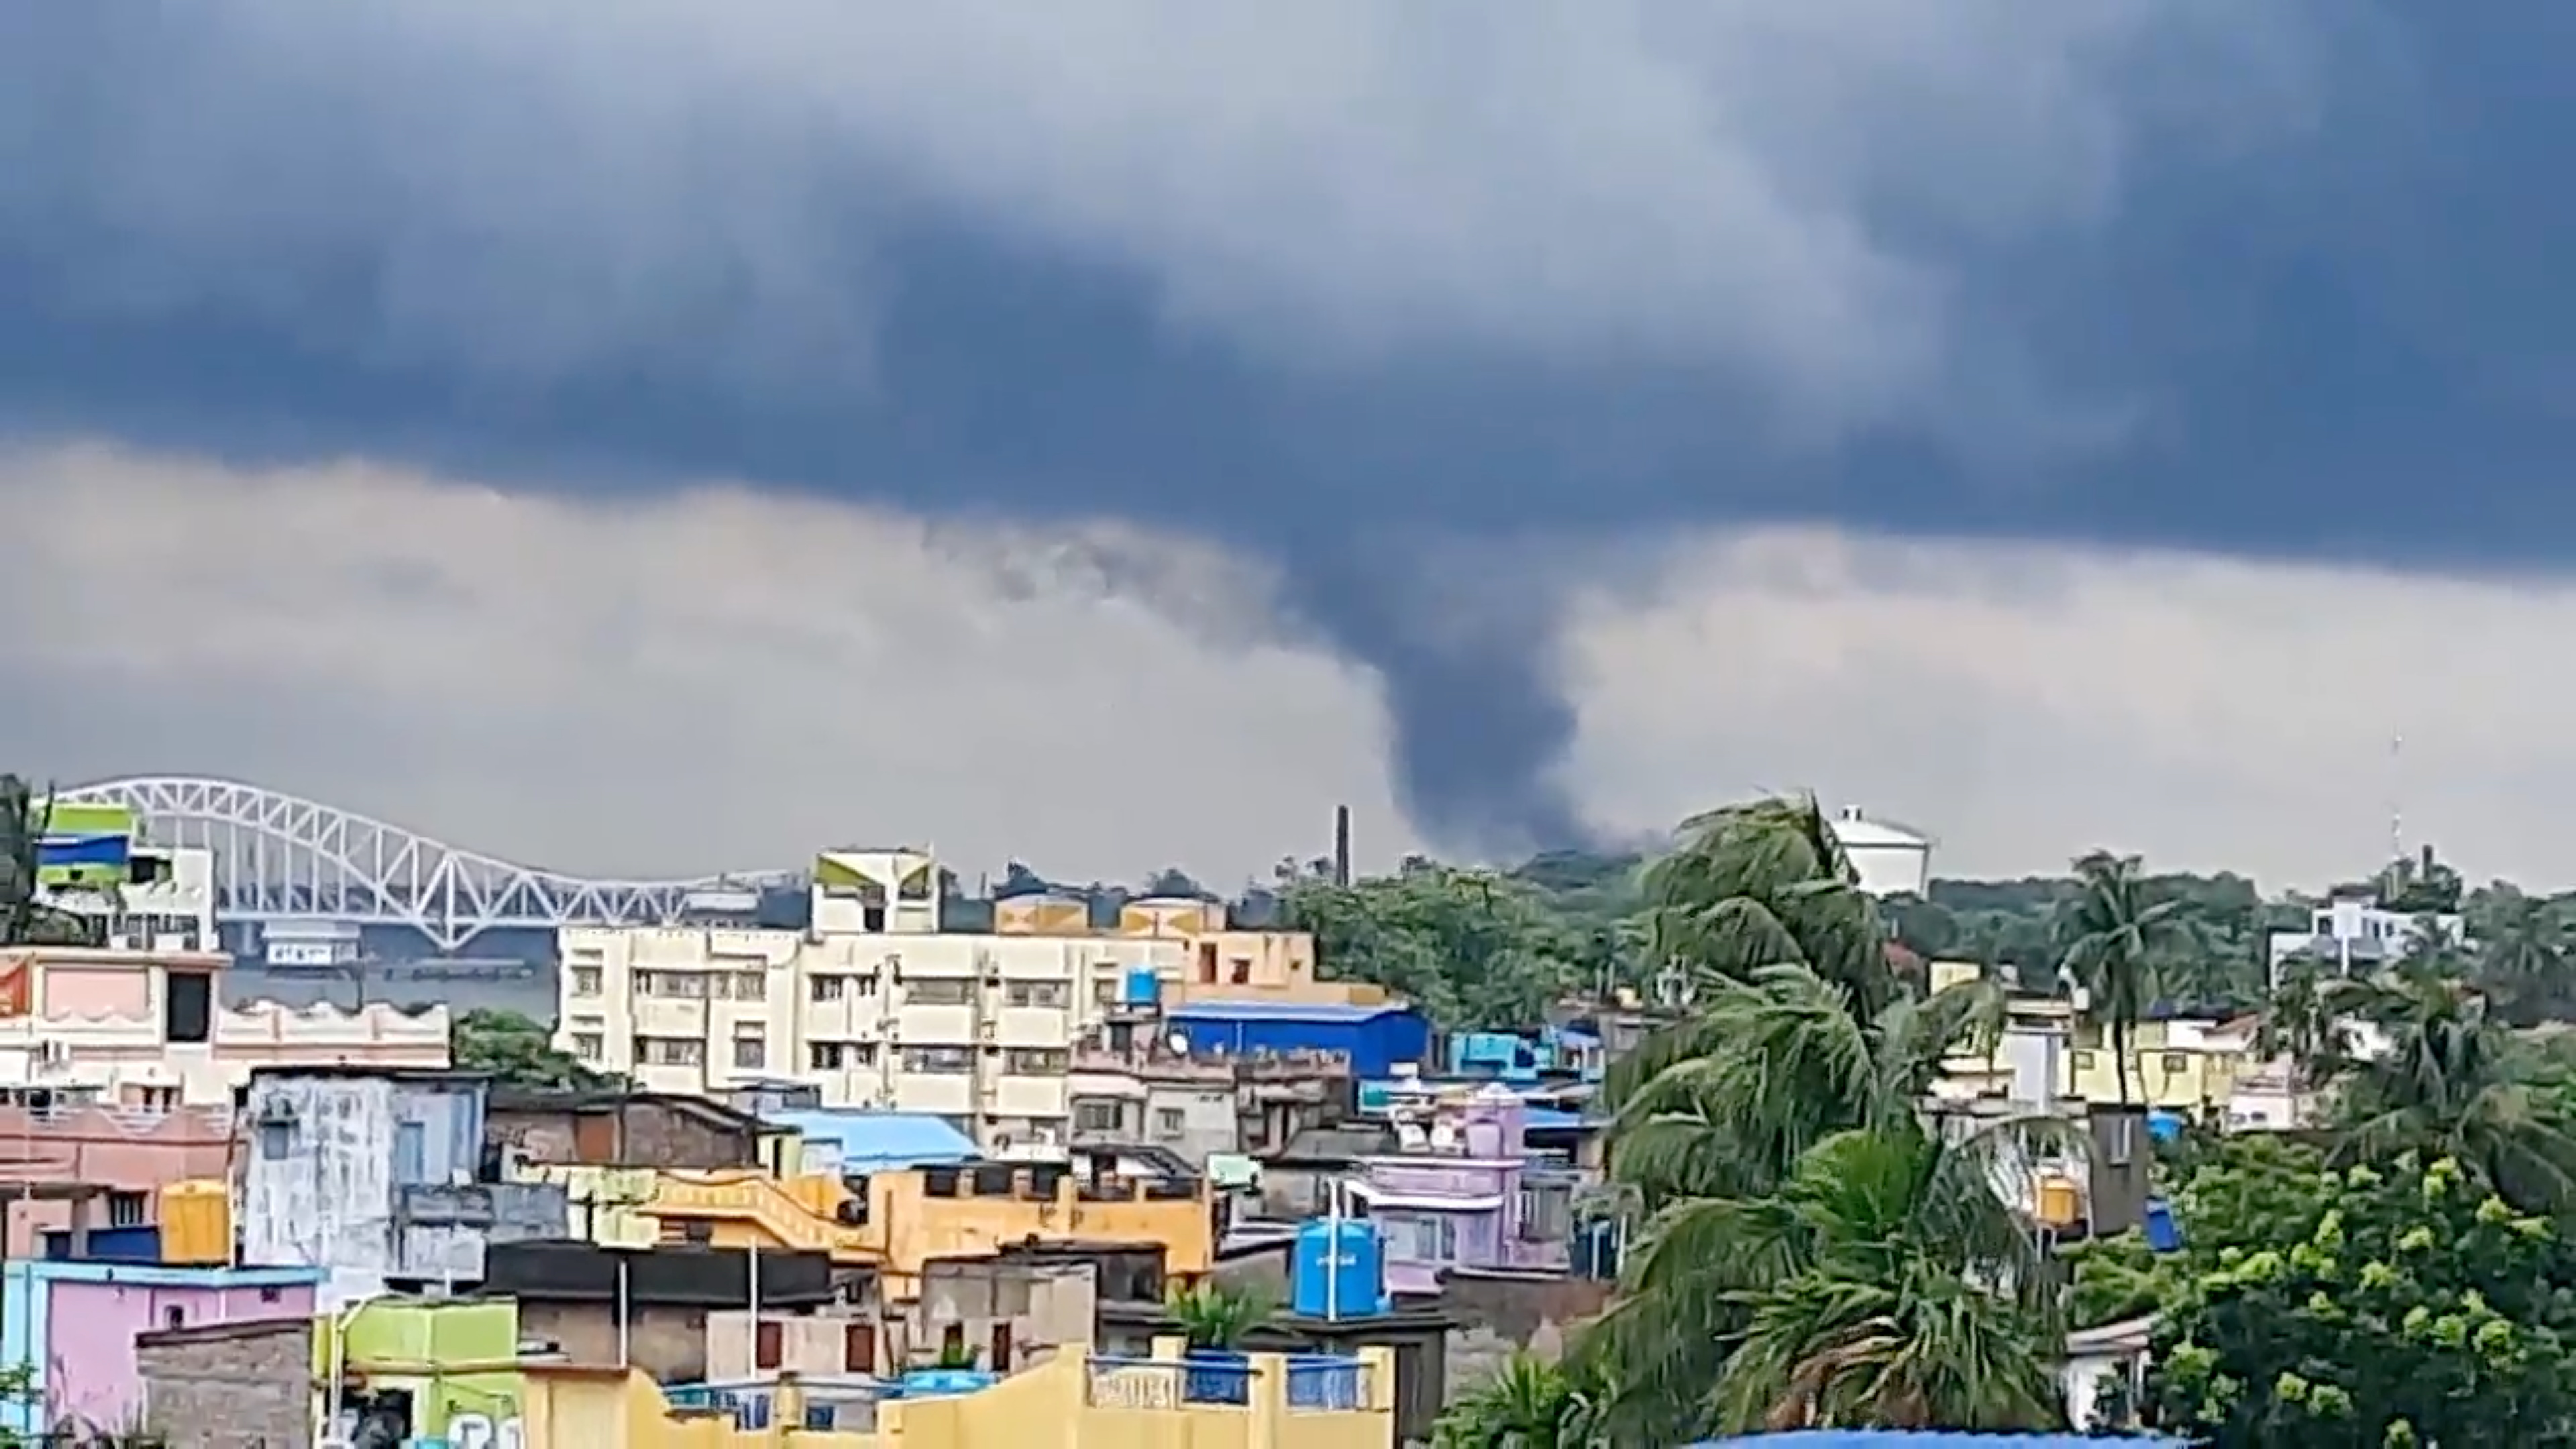 A tornado is seen approaching as Cyclone Yaas continues to move inland, in Naihati